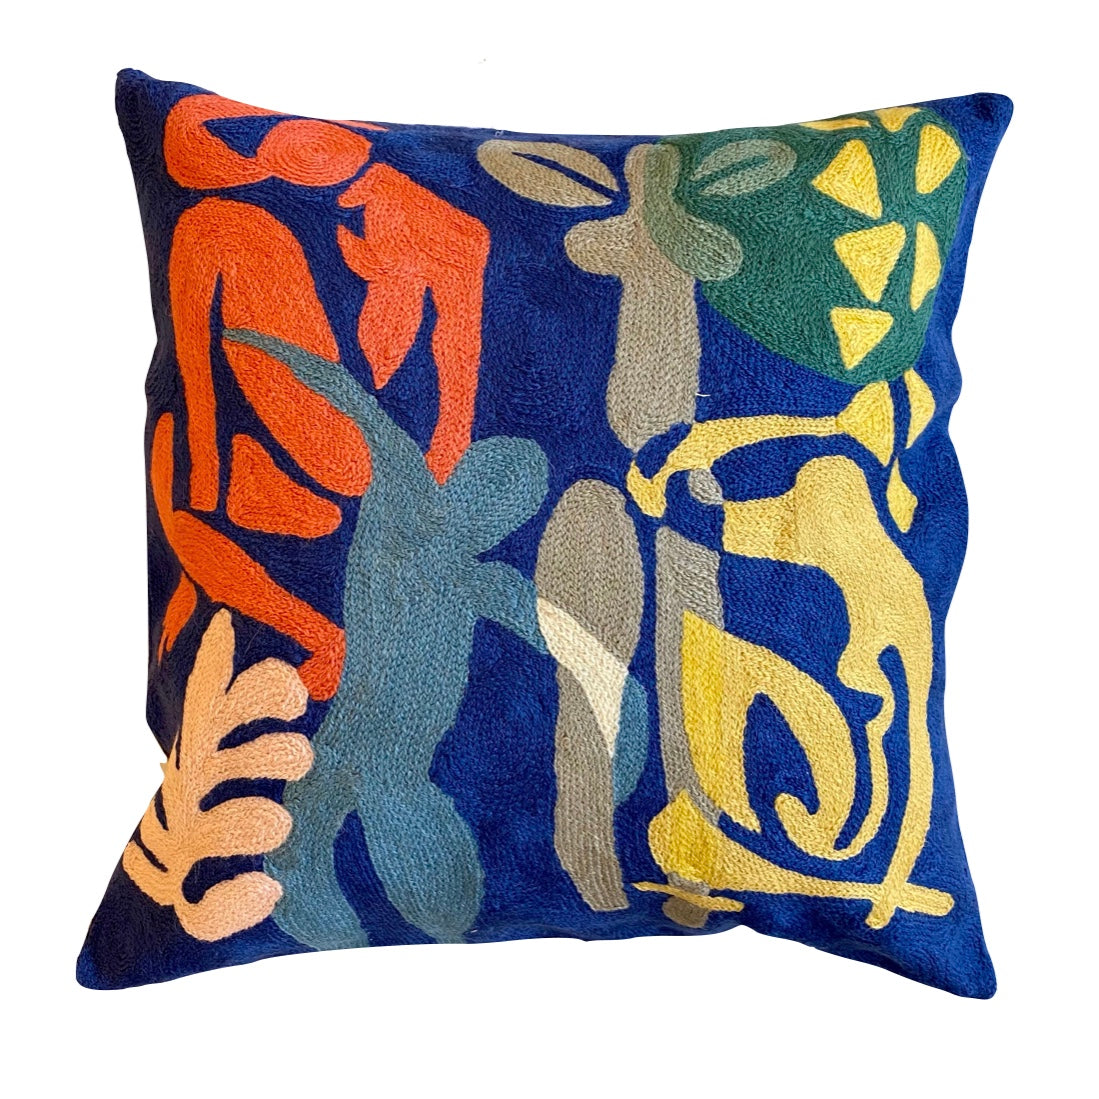 Matisse Silhouettes Chainstitch Pillow